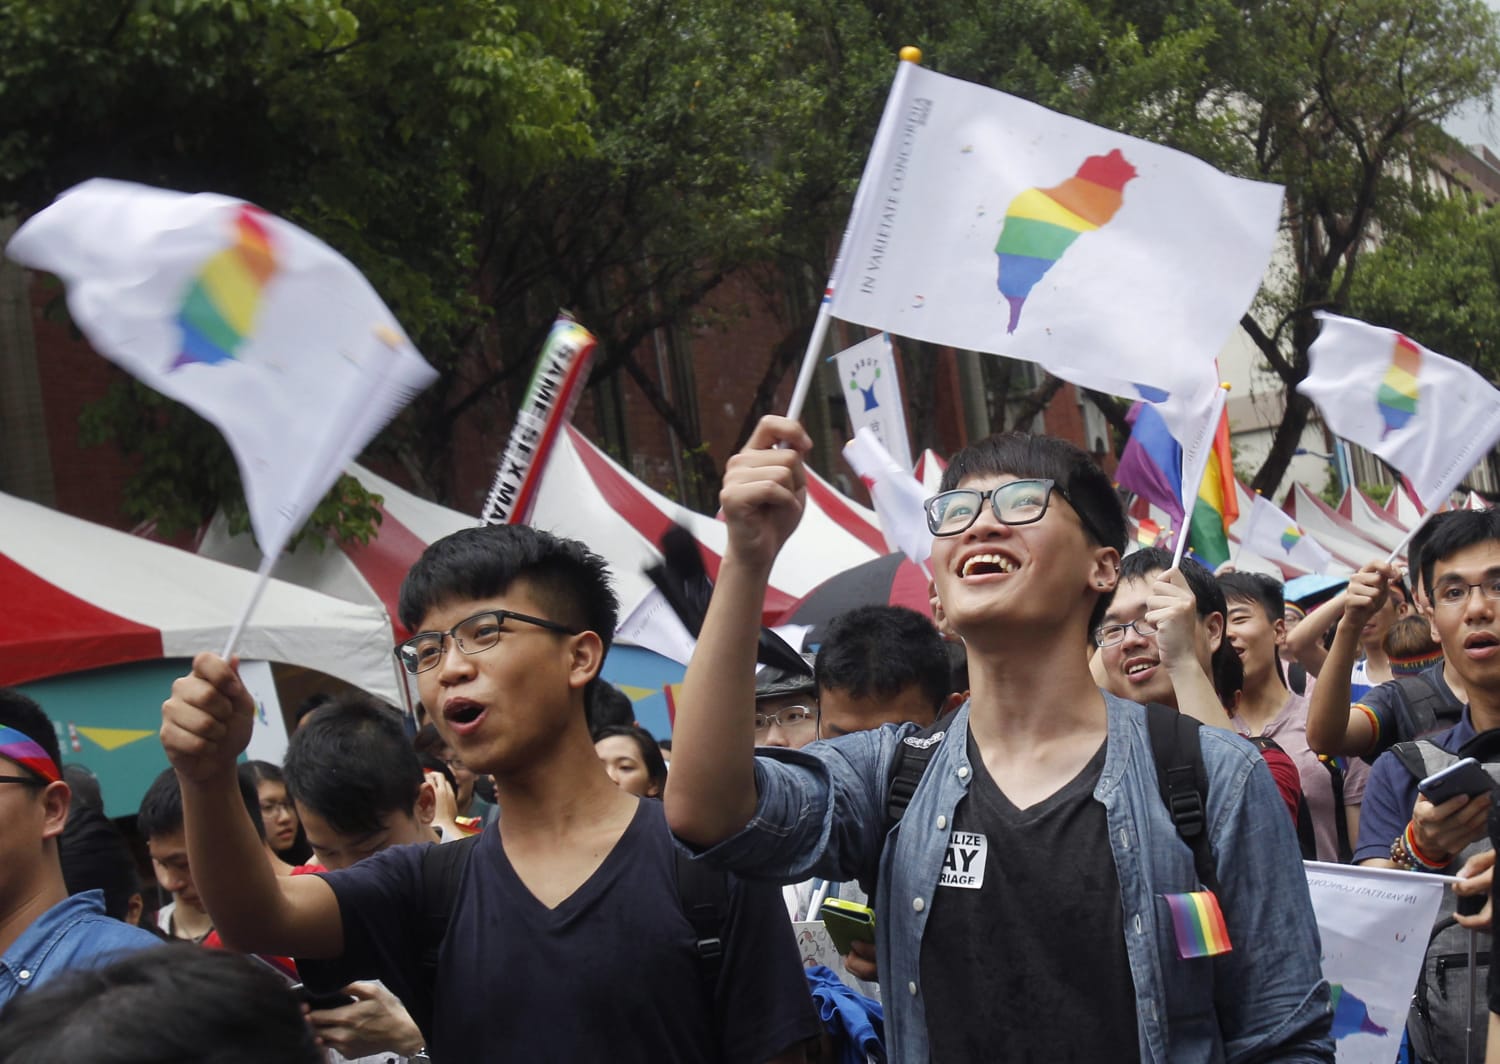 In US and Abroad, a Worrisome Time for LGBTQ Activists pic